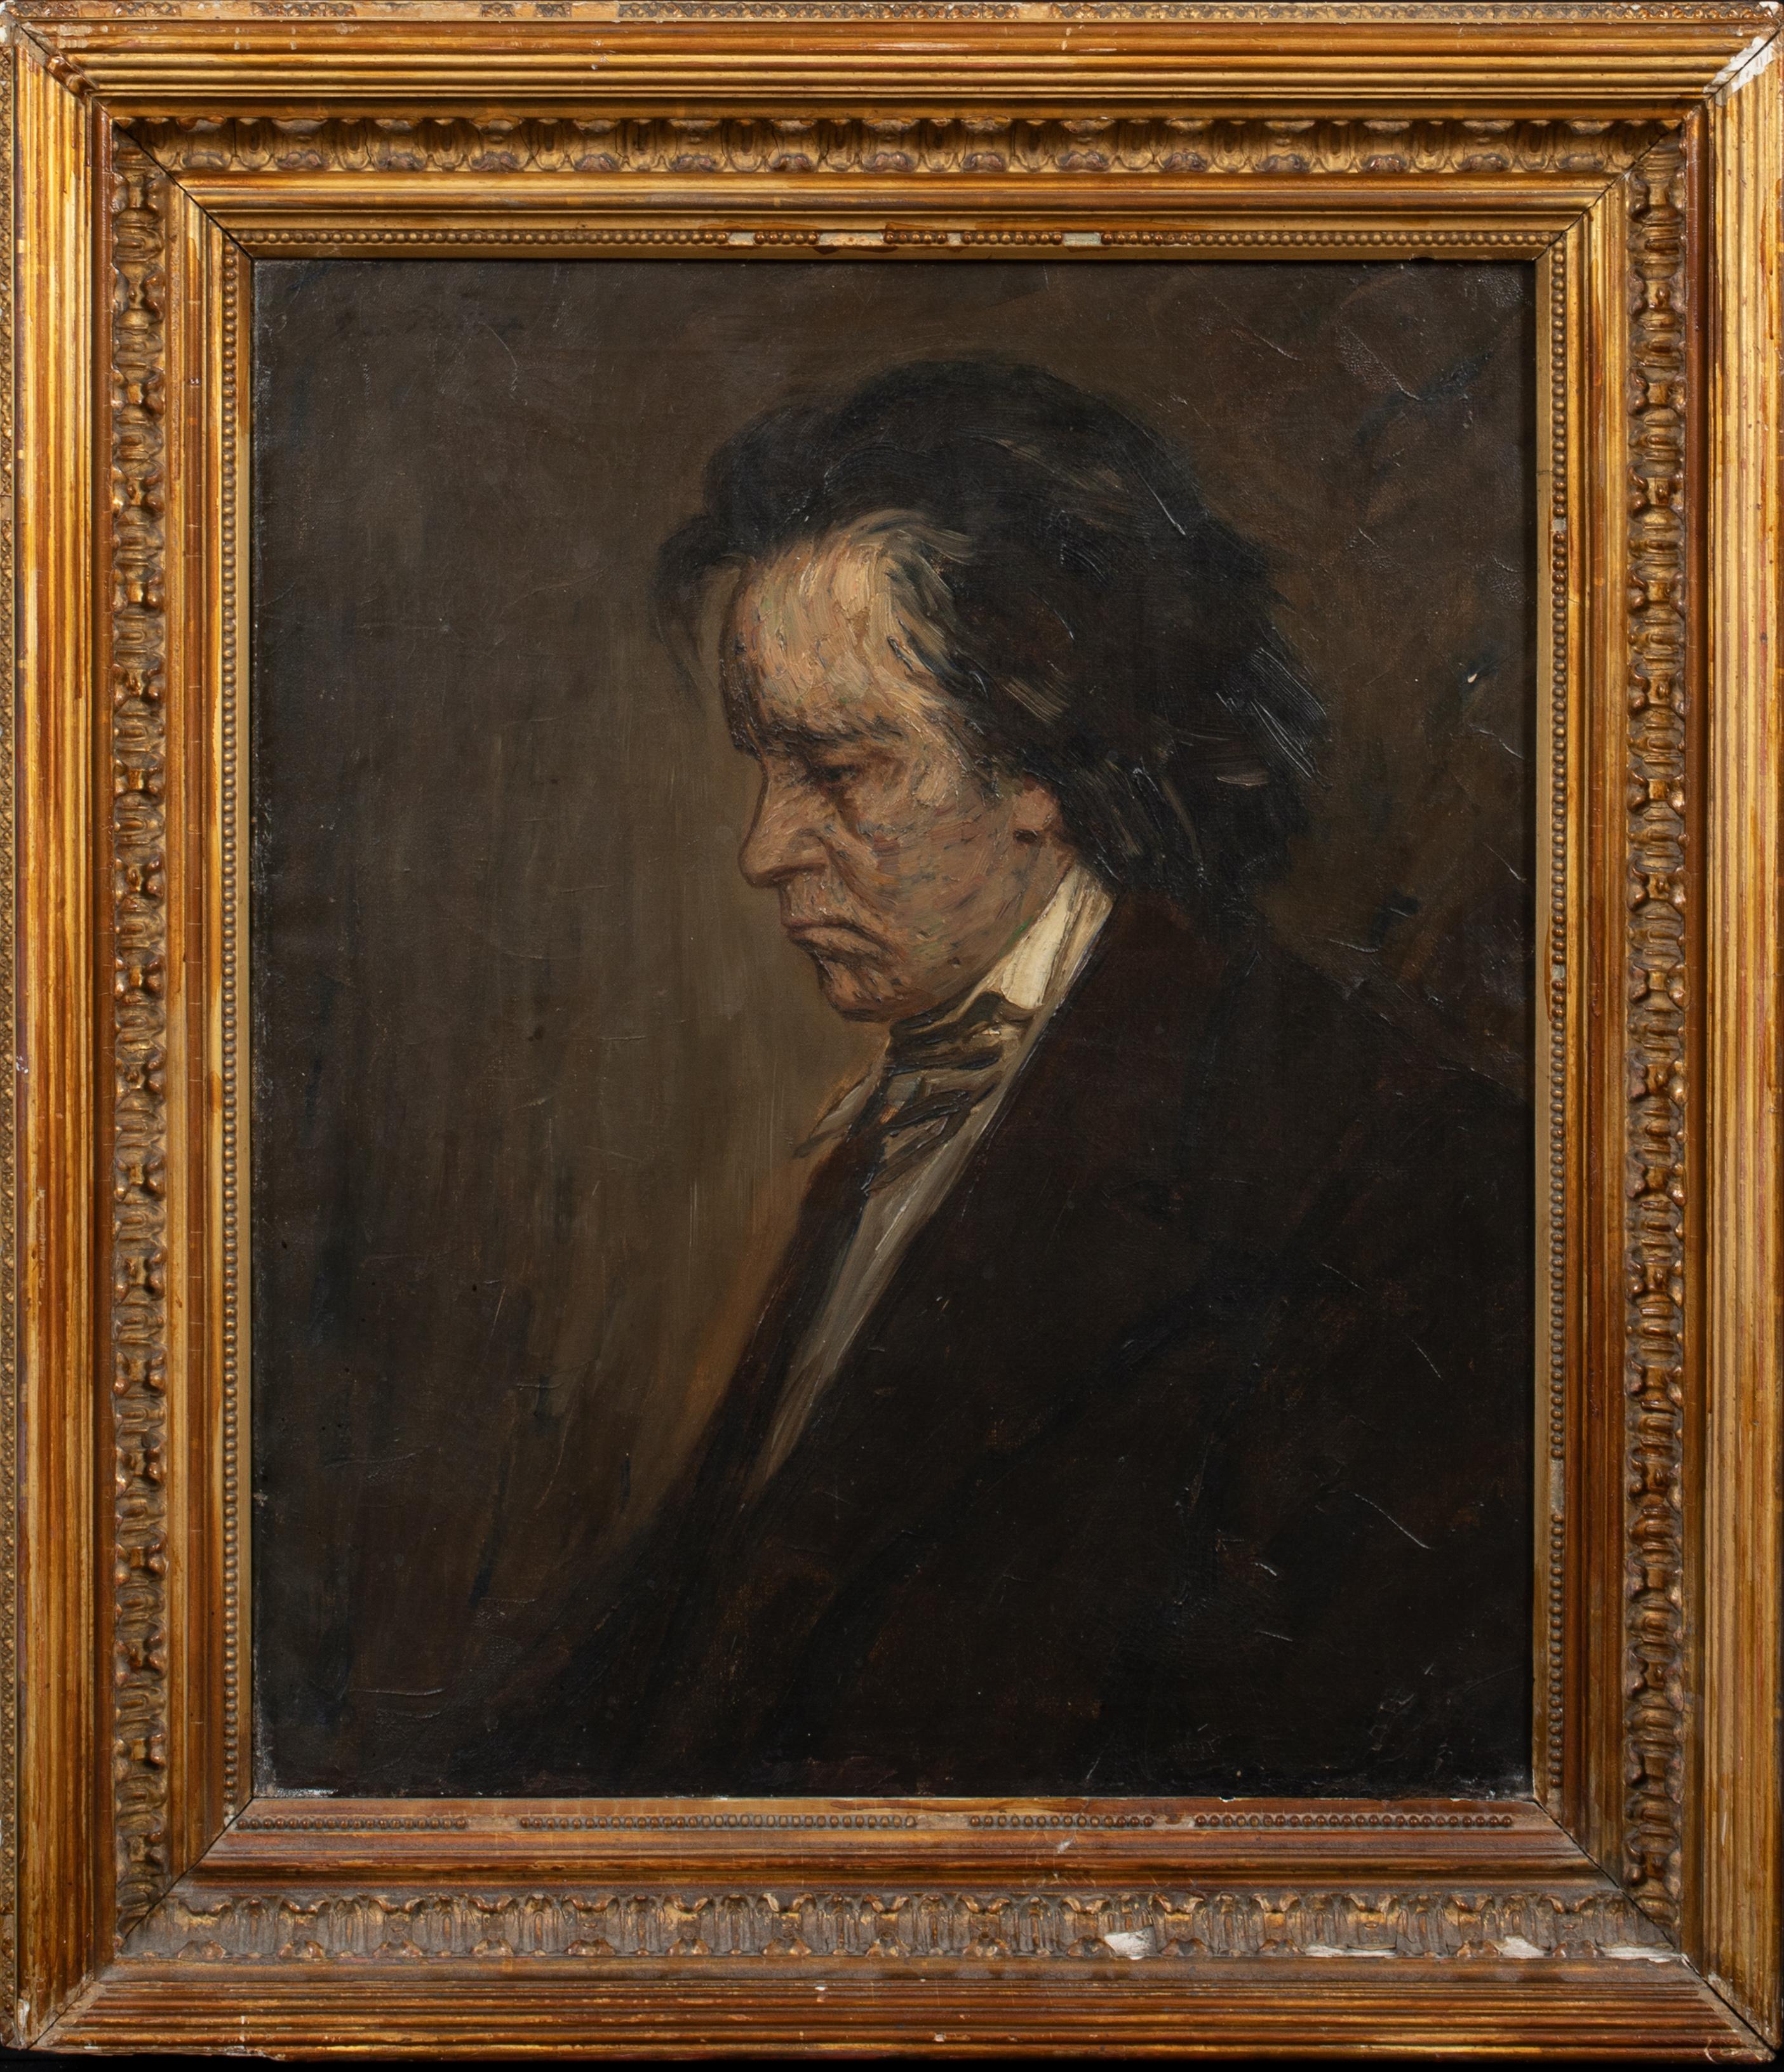 Portrait Of Ludwig van Beethoven (1770-1827), 19th Century - Painting by Unknown